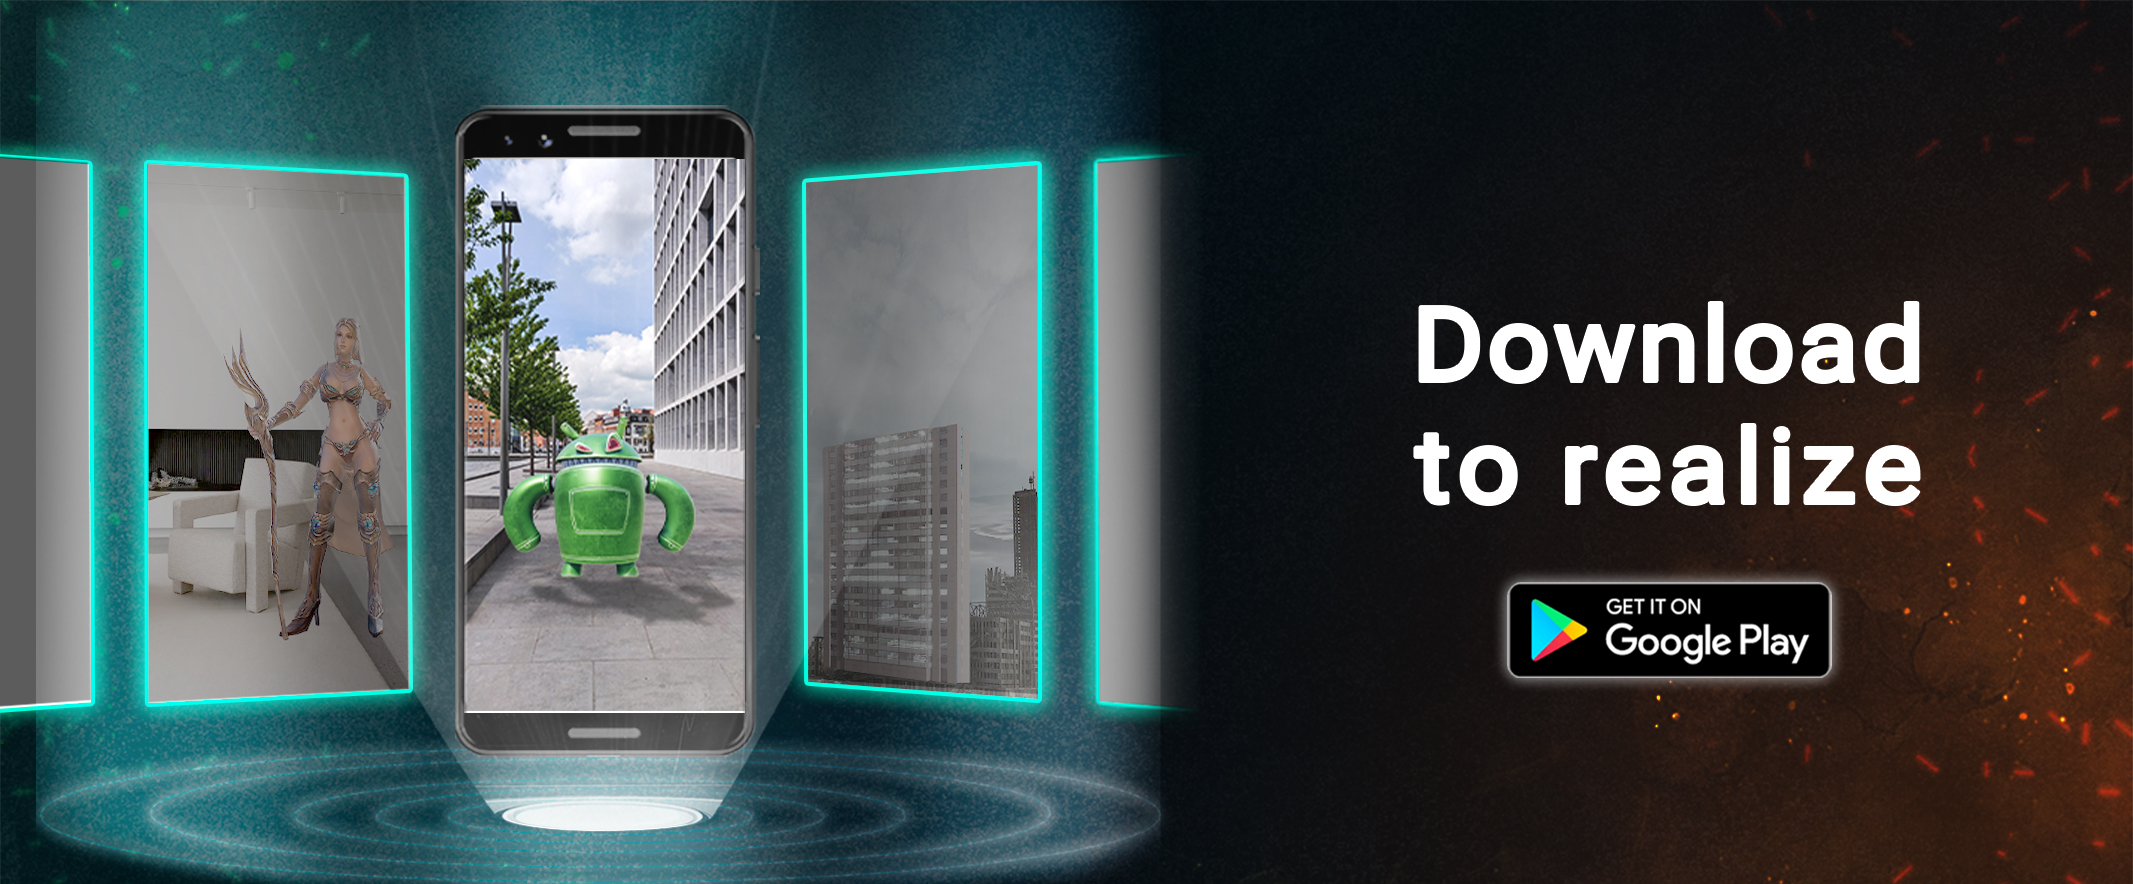 Arindu Augmented Reality Application Download Banner